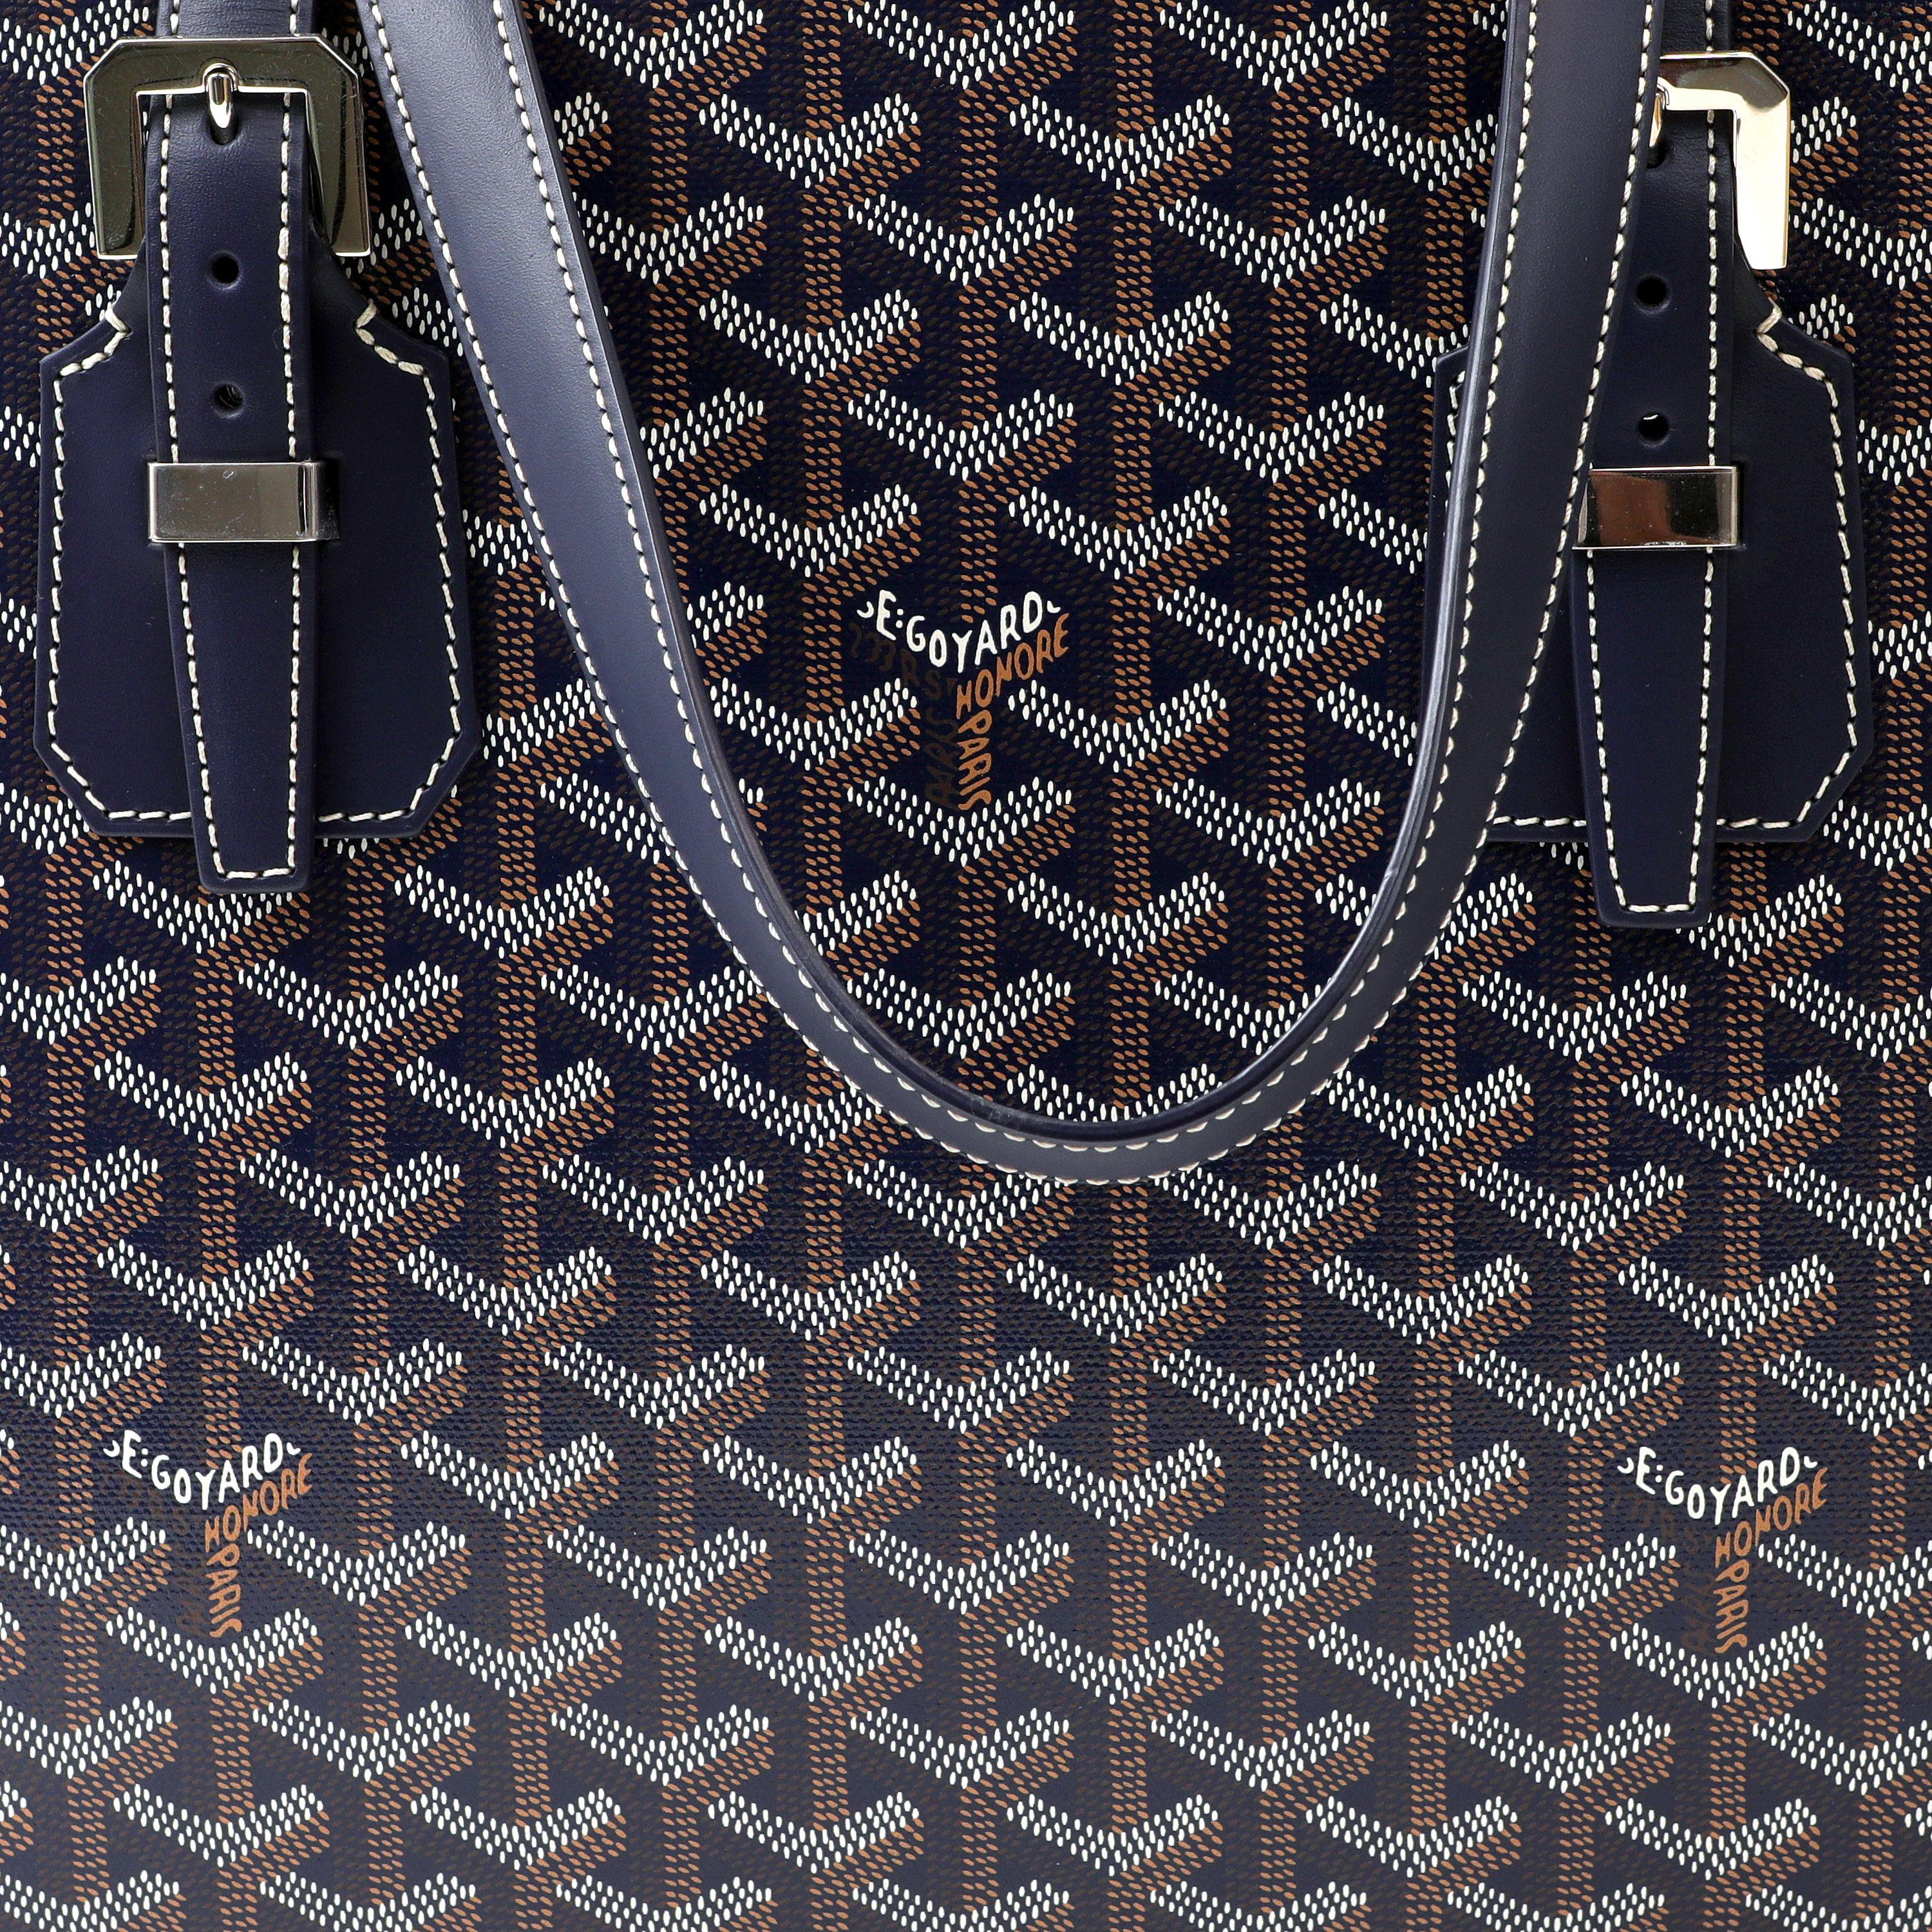 This authentic Goyard Navy Okinawa PM Tote is pristine; likely never carried.  Navy blue coated canvas iconic Goyard monogram with dark navy leather straps and trimmings.  Silver zippered top.  Dust bag included. 

PBF 13918
